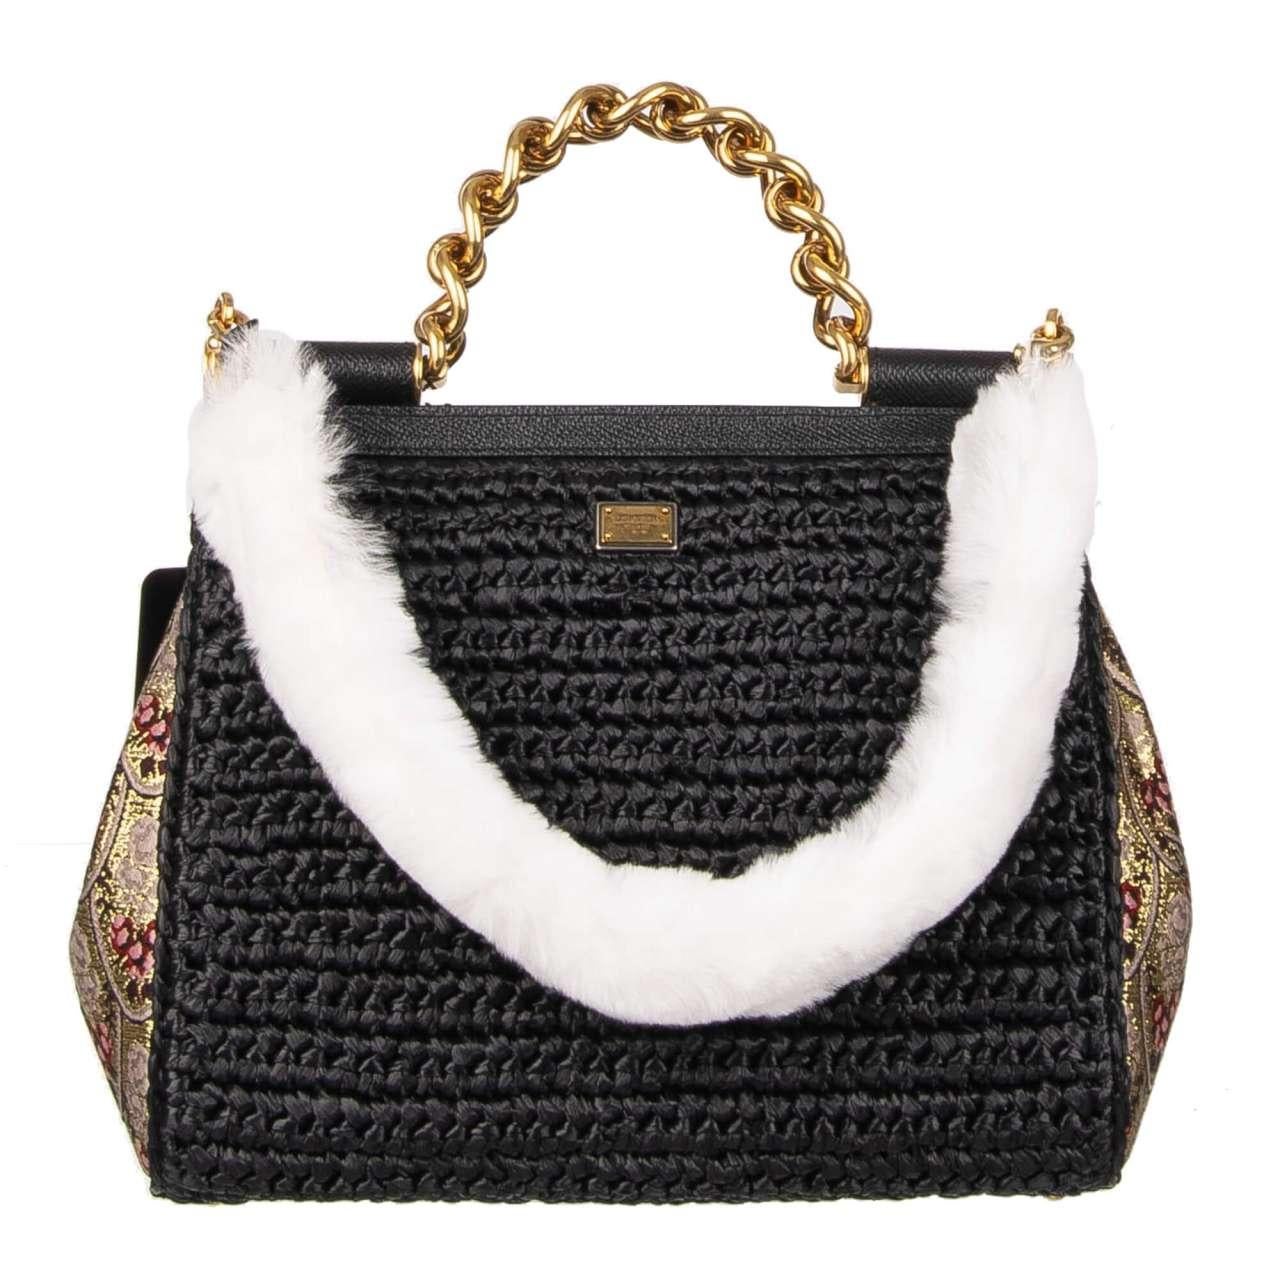 - Leather and rabbit fur bag Strap / Handle in White and Gold by DOLCE & GABBANA - Former RRP: EUR 195 - New with Tag - MADE IN ITALY - Model: EP0077-AB410-89697 - Material: 50% Calfskin, 50% Rabbit fur - Color: White / Black / Gold - Length: appr.